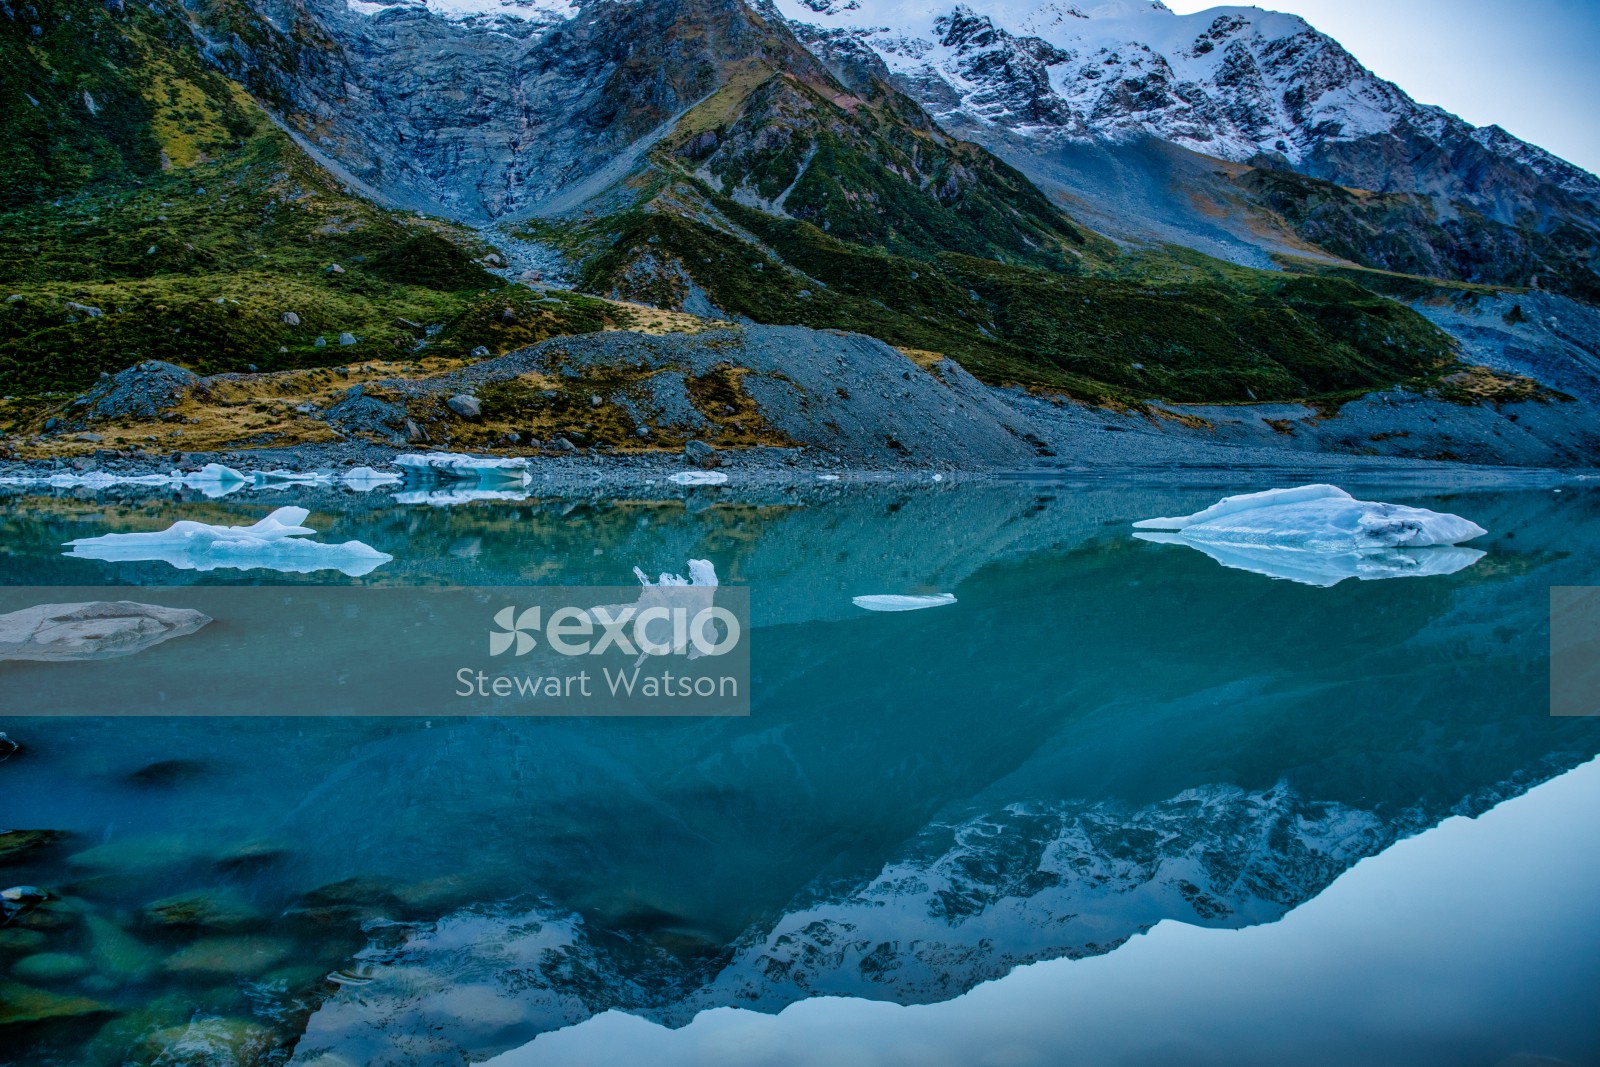 Hooker valley Lake and its icebergs